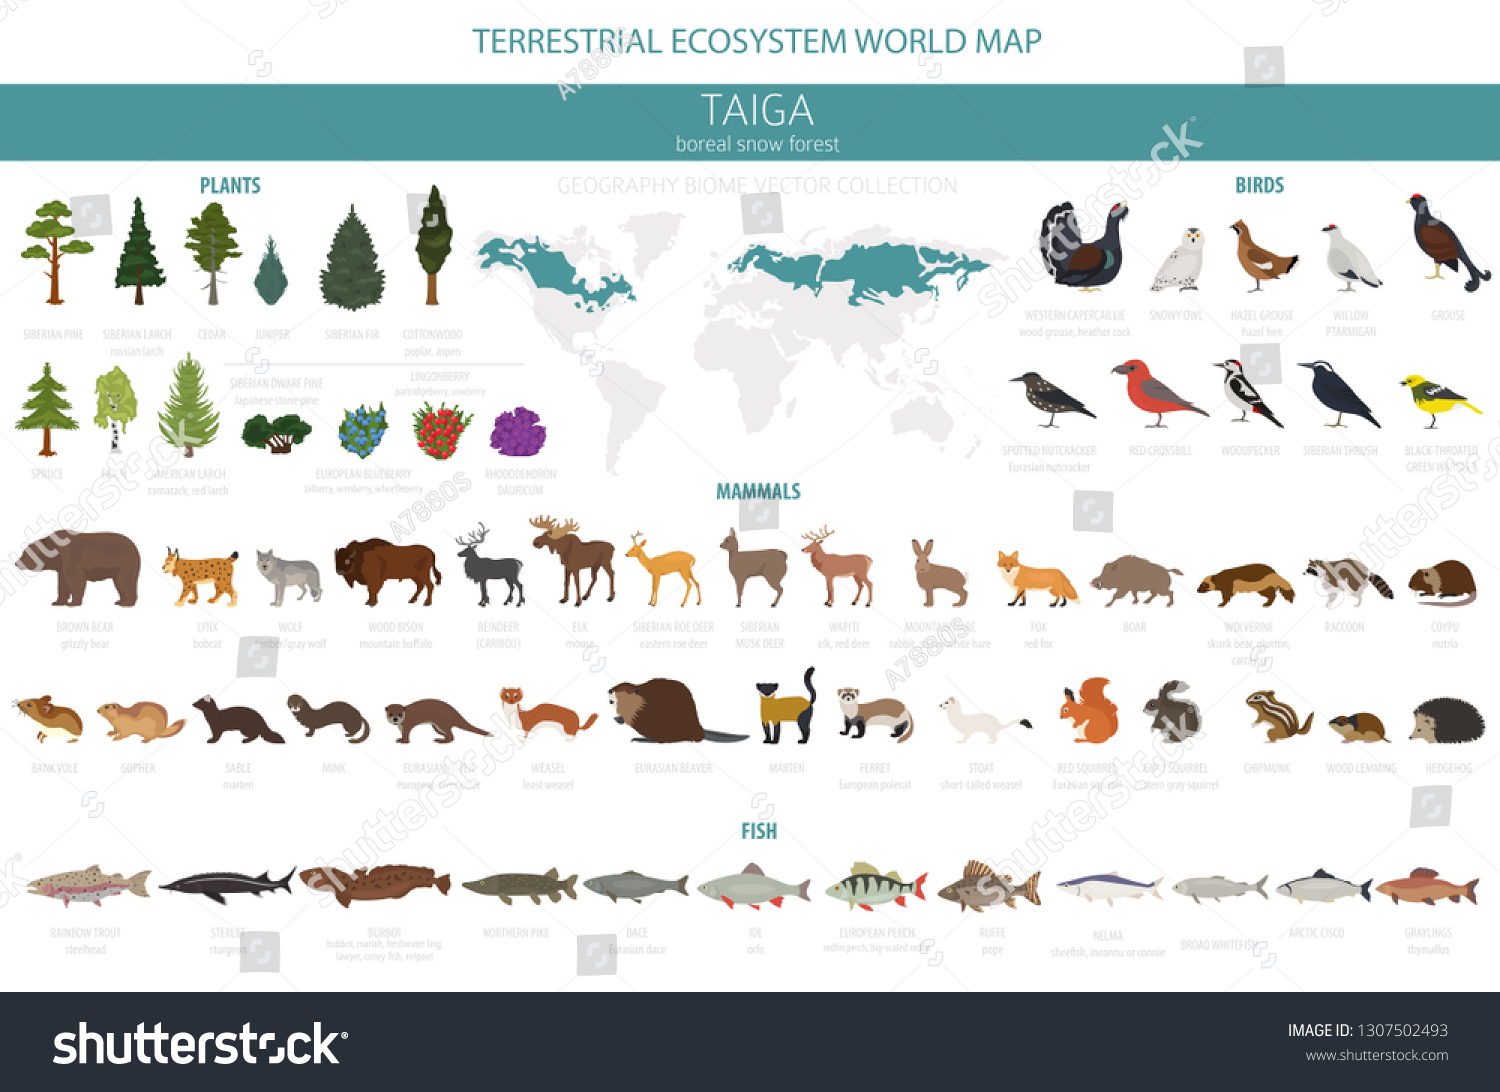 SVG of Taiga biome, boreal snow forest. Terrestrial ecosystem world map. Animals, birds, fish and plants infographic design. Vector illustration svg